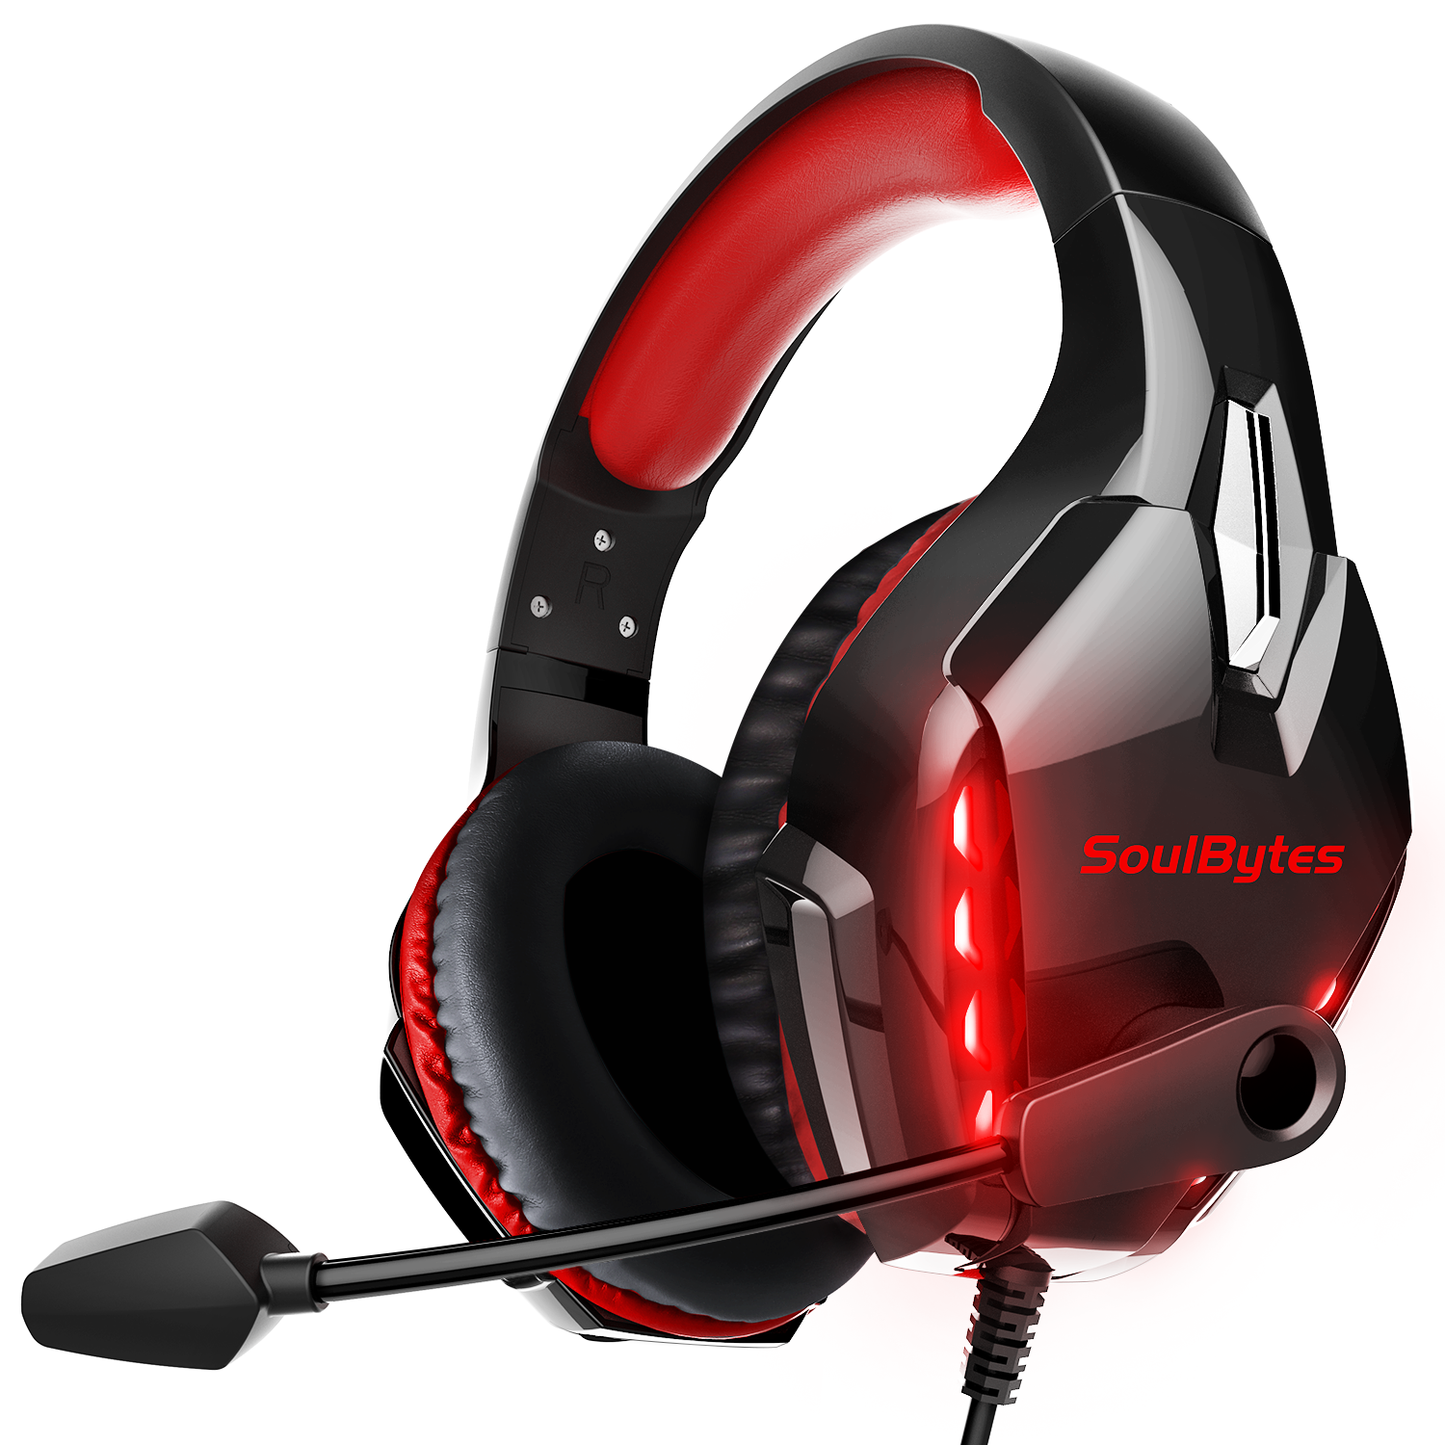 LED Light Display Wintory Soulbytes S11 Gaming Headset Wintory